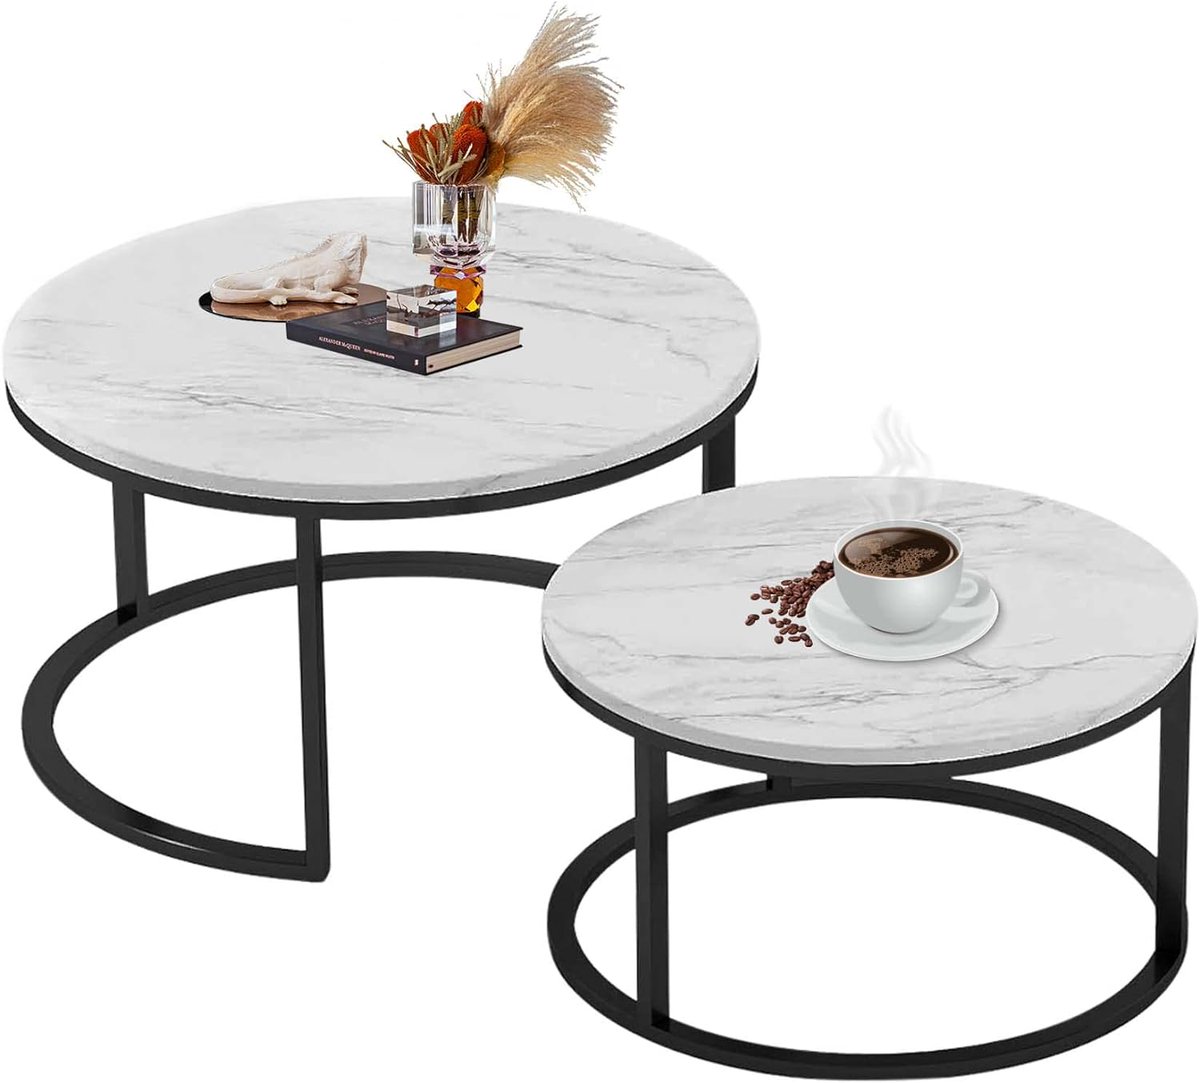 Marble And Iron Coffee Table - 30 Best Choice For Home wildriverreview.com/marble-and-iro… #MarbleCoffeeTable #IronFurniture #LuxuryLiving #HomeDecor #LivingRoomStyle #MarbleAndIron #CoffeeTableDesign #InteriorInspiration